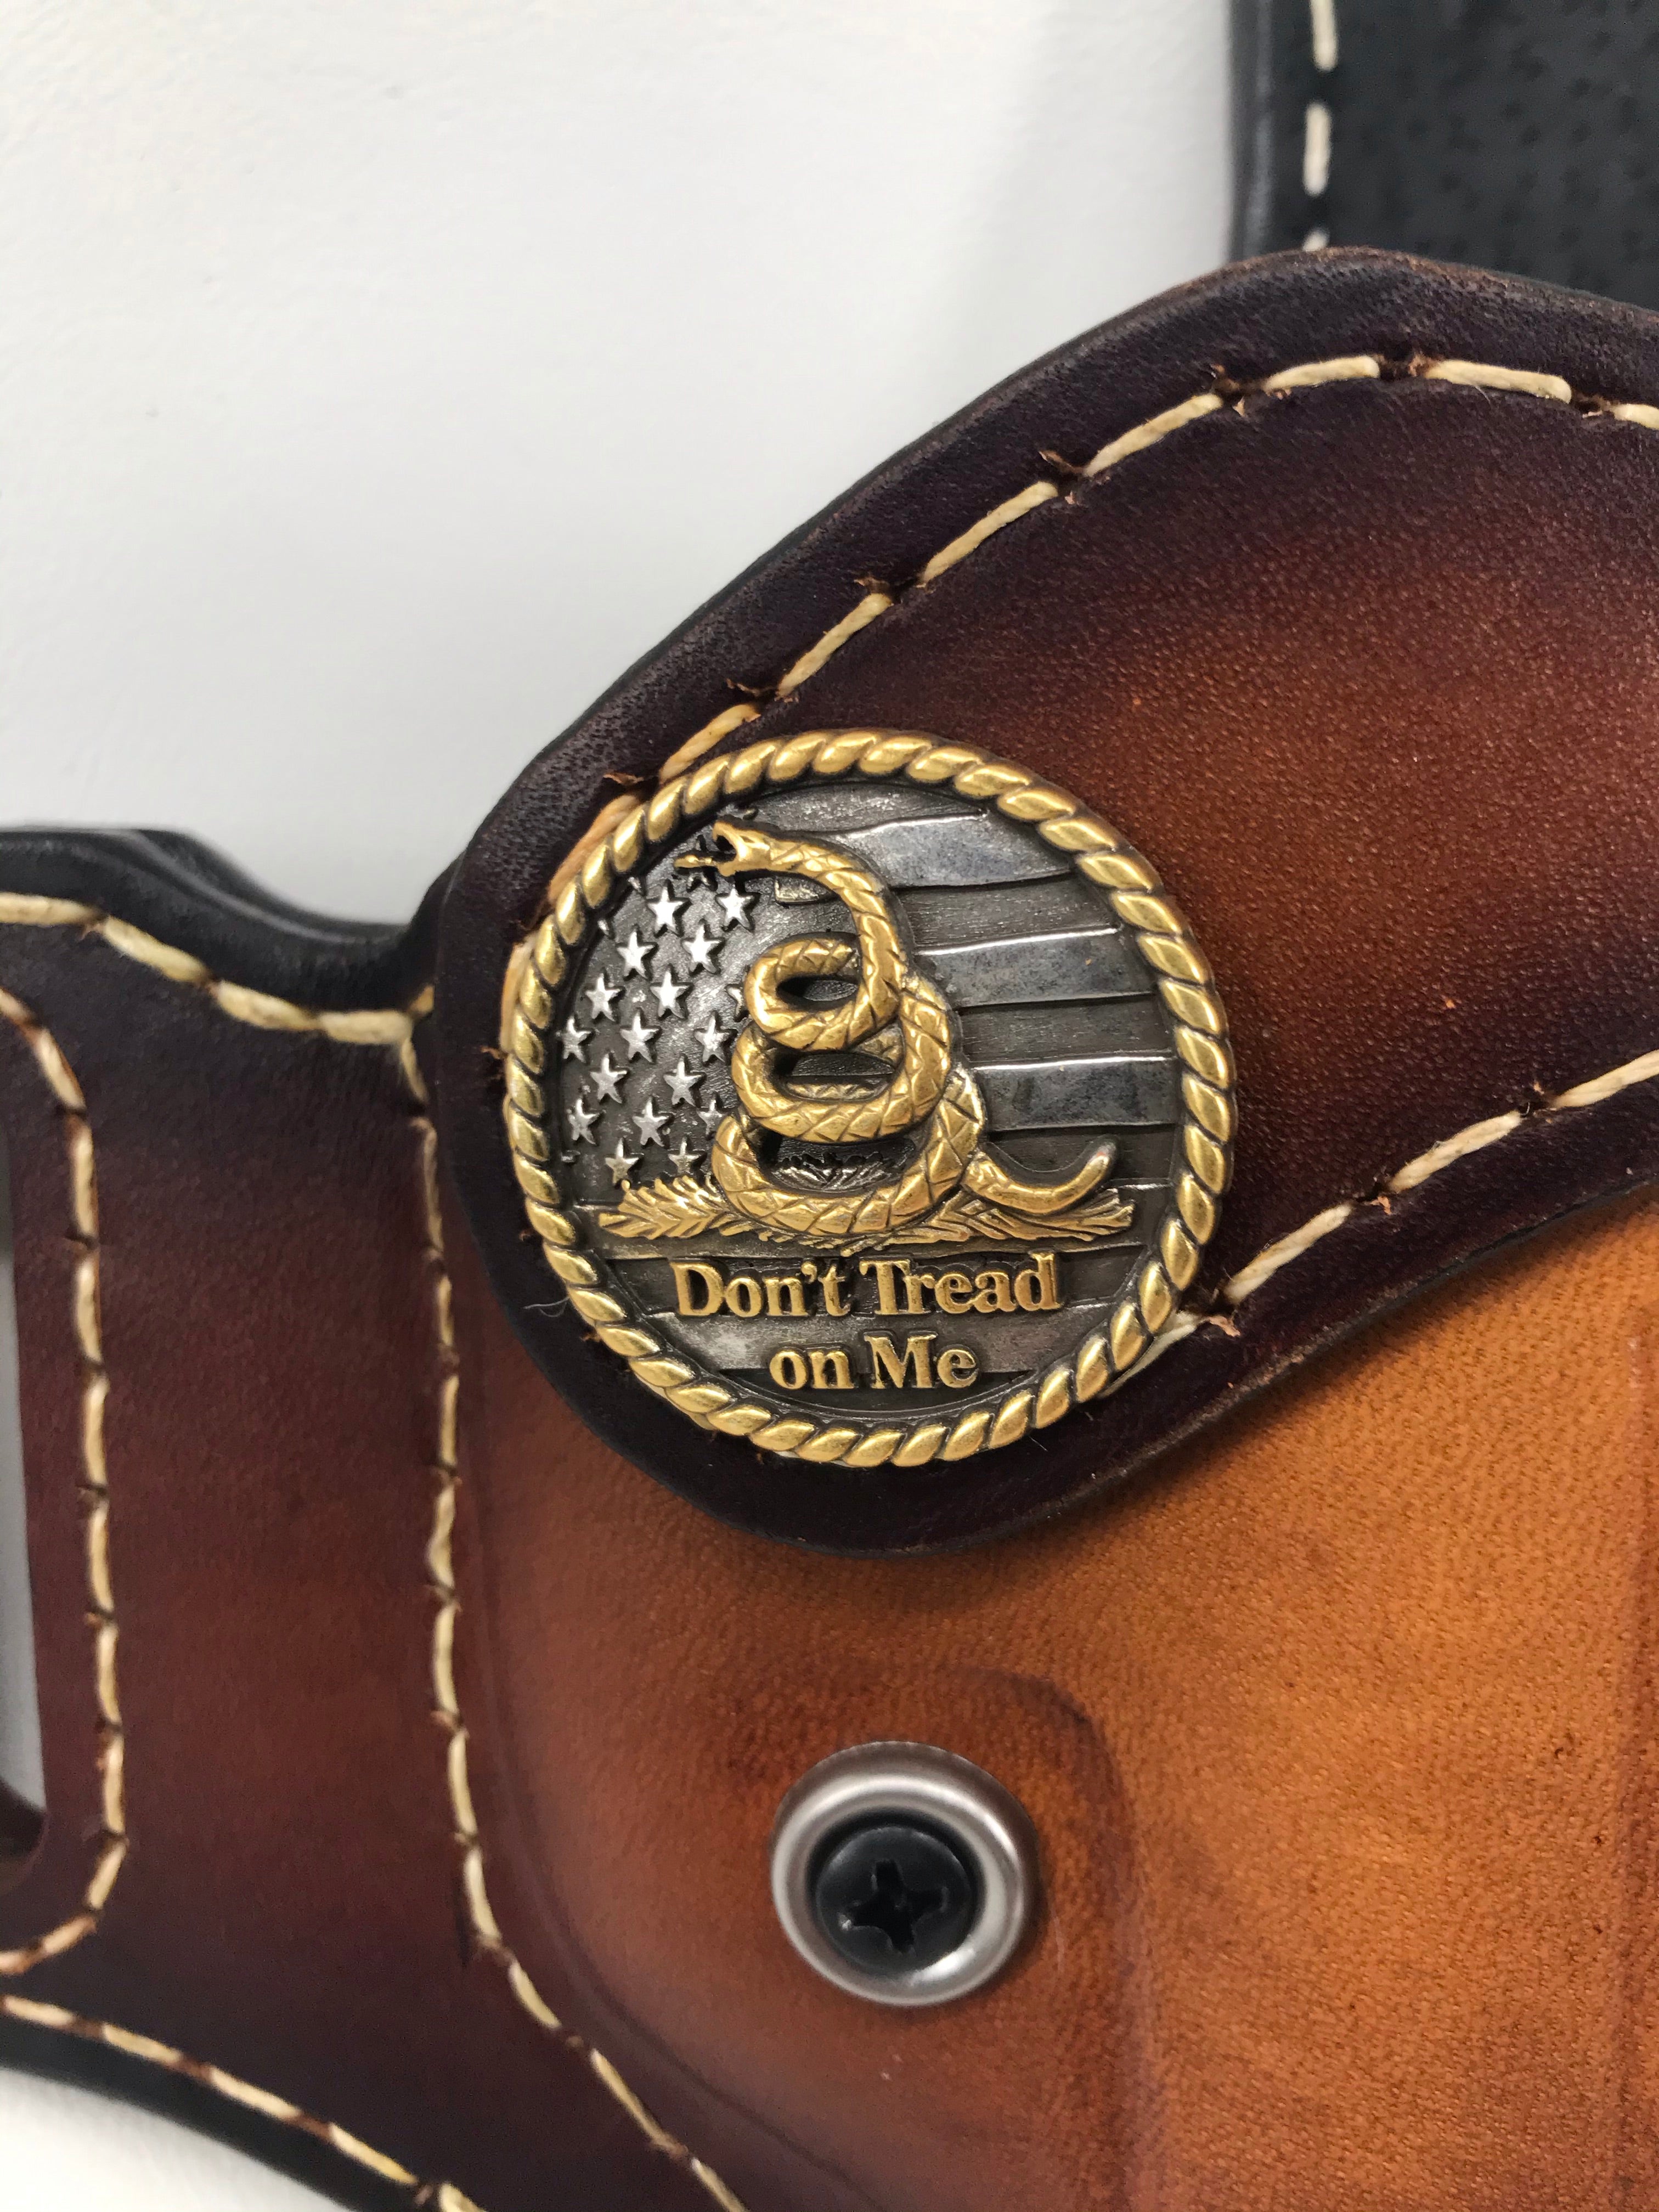 DONT TREAD ON ME Emblem Style Retention Leather Holster OWB -BROWN (Locking Leather) - Black Swamp Leather Company